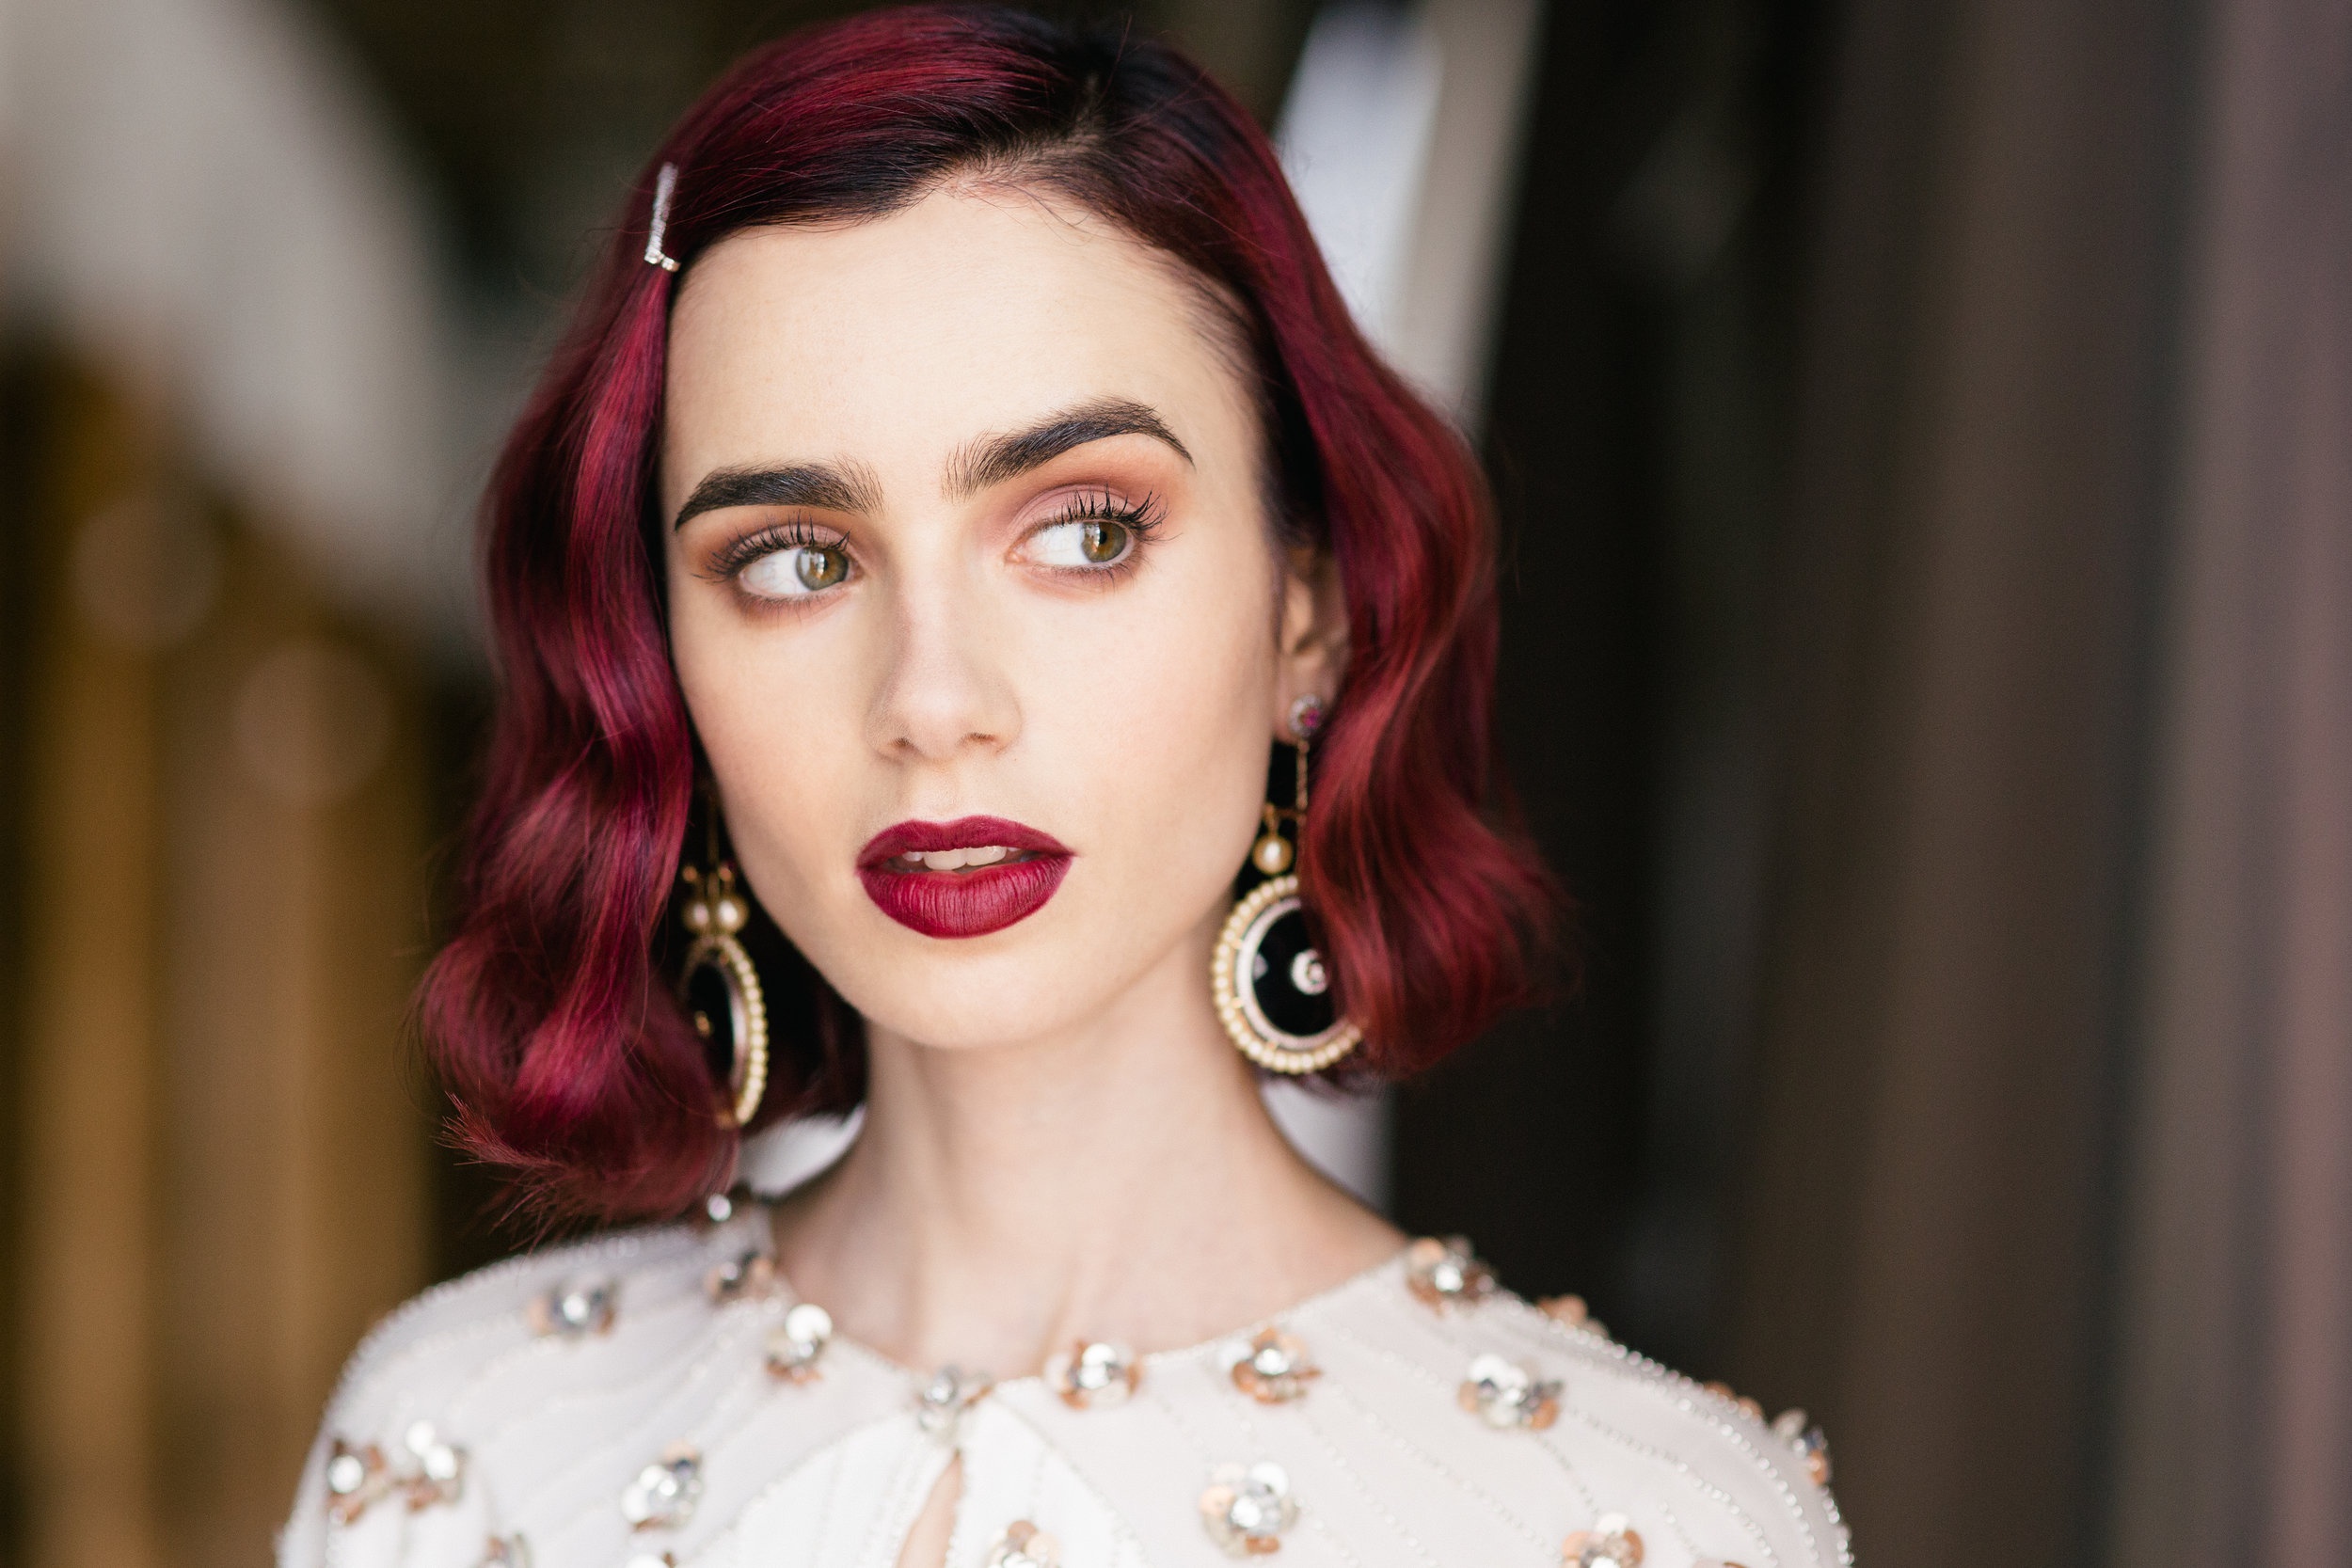 Actress Earrings English Face Green Eyes Lily Collins Lipstick Model 2500x1667